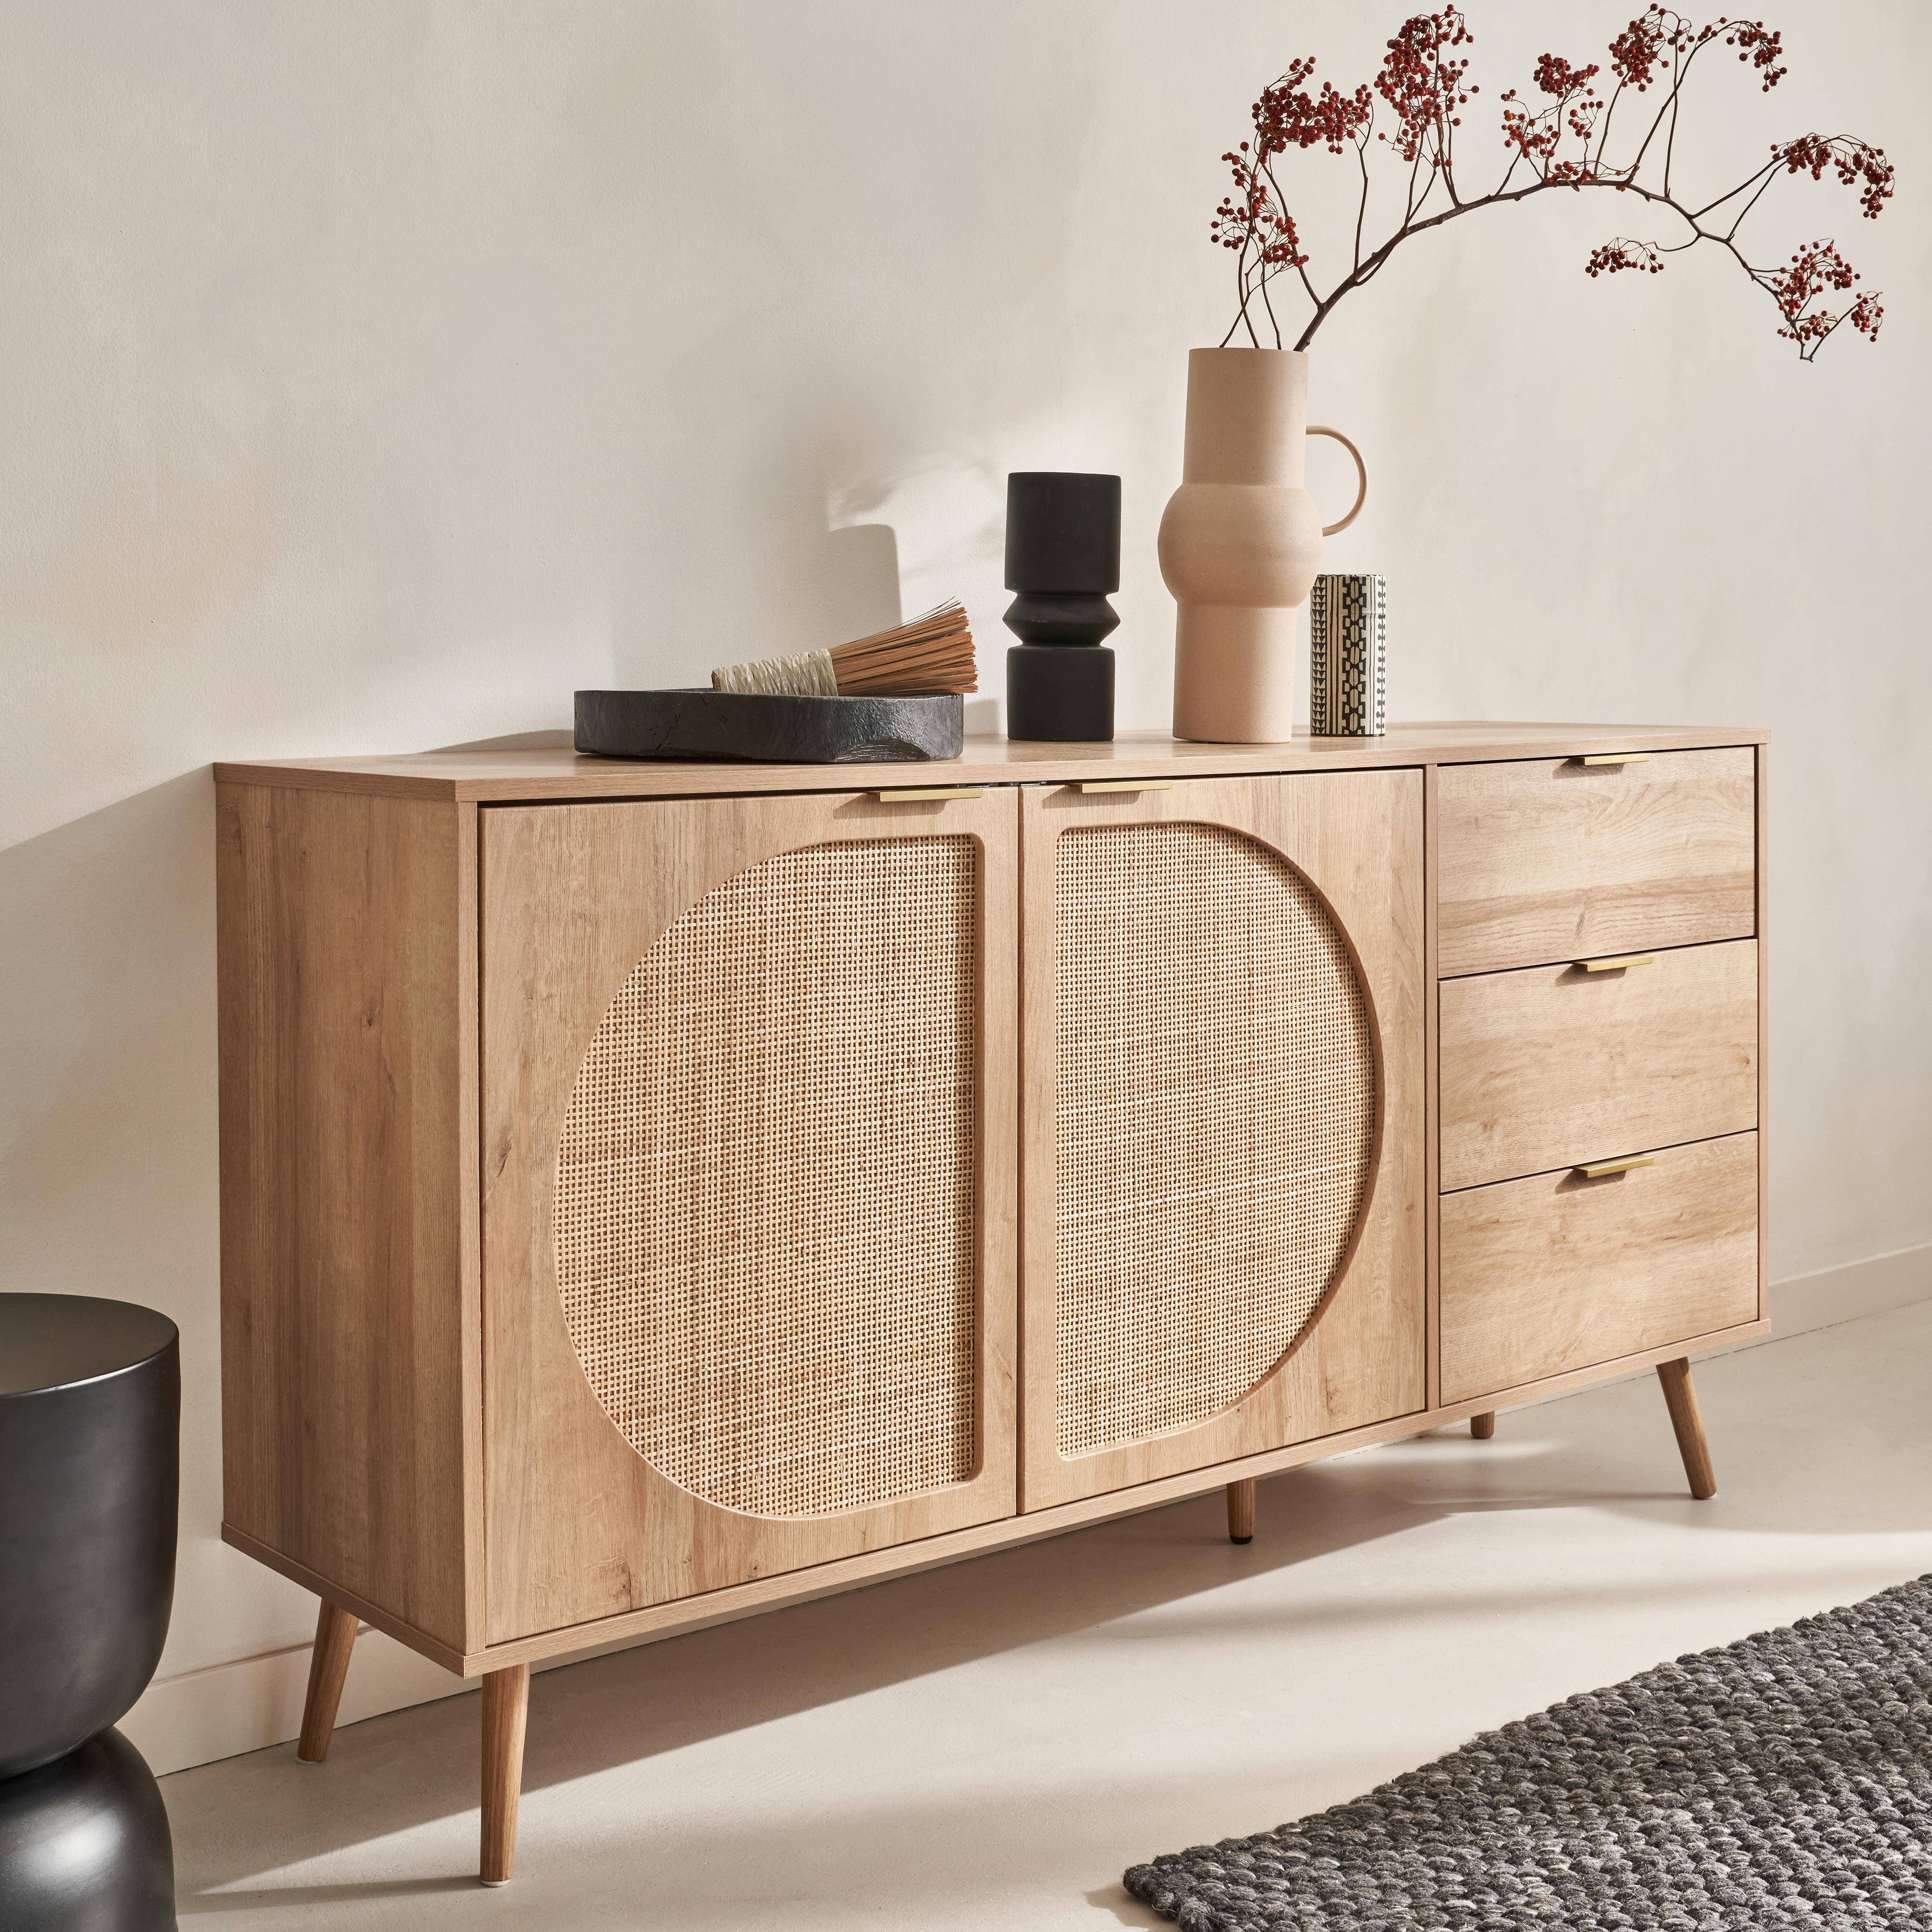 Wood and rounded cane rattan sideboard, 150x39x79cm, Eva, 3 drawers, 2 doors Photo2